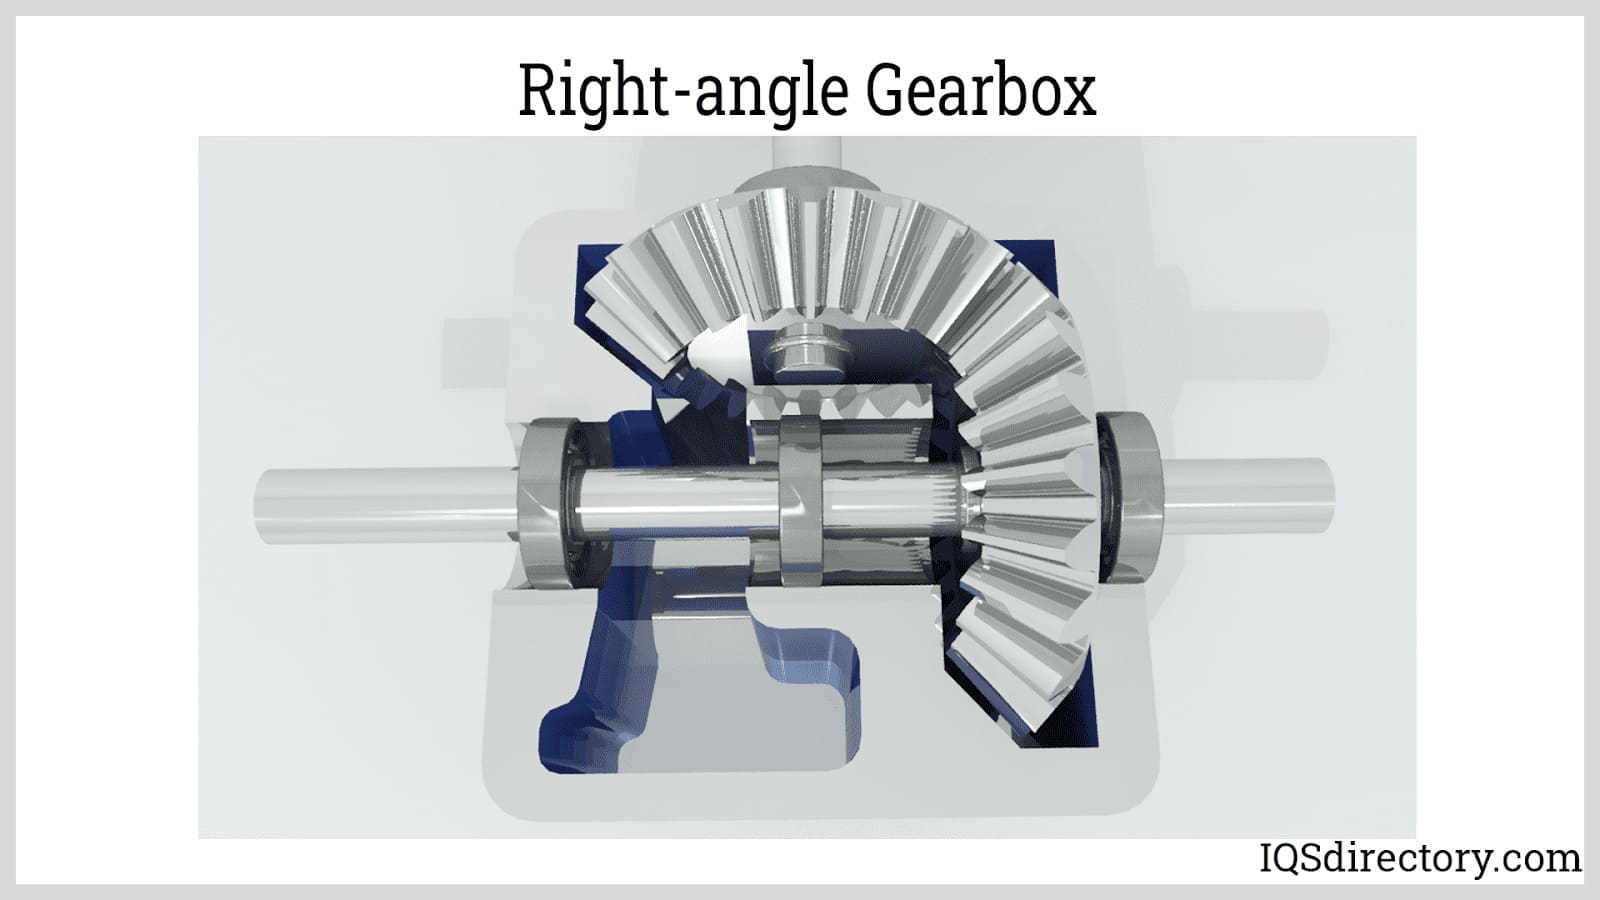 https://www.iqsdirectory.com/articles/gearbox/gear-drive/right-angle-gearbox-iqs-pic.jpg